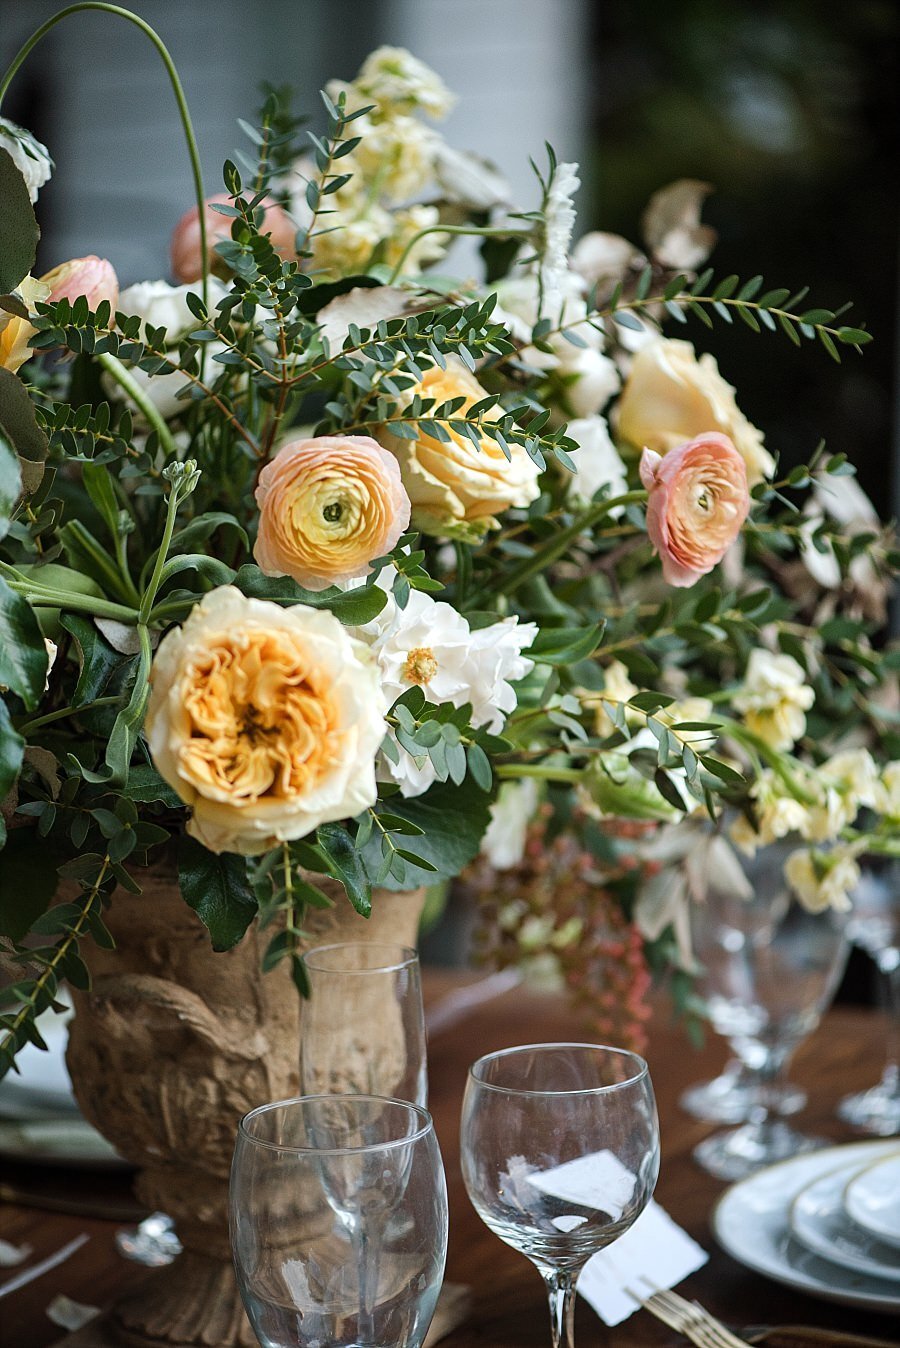 Orange, yellow and cream colored flowers in a tall compote